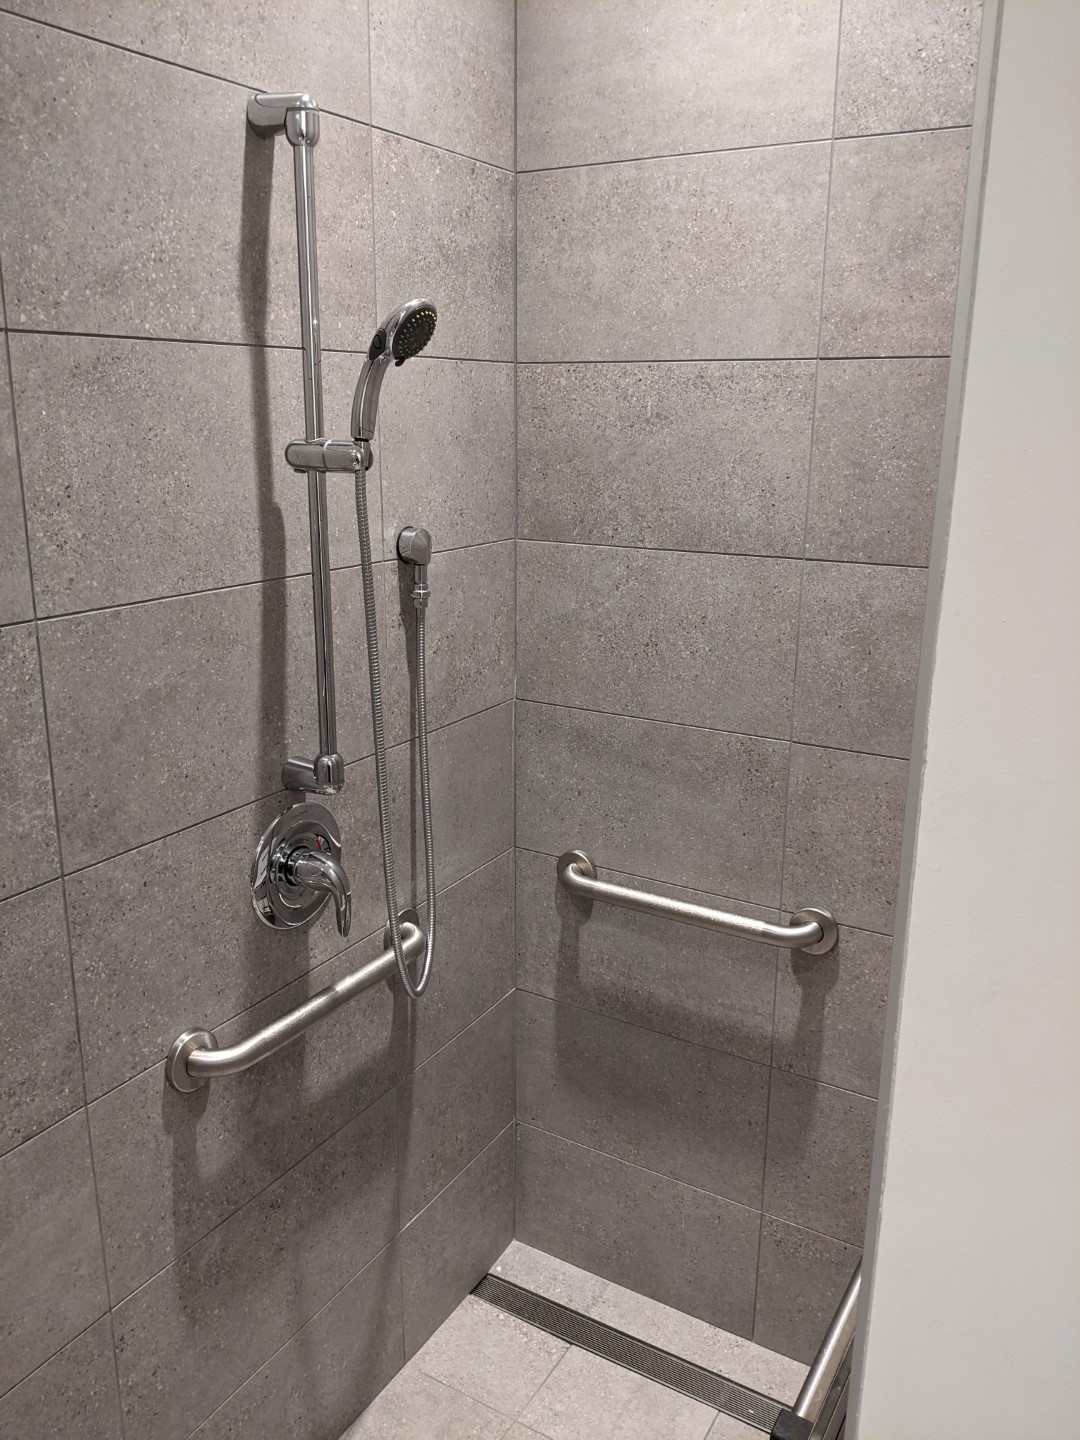 A metal shower head and faucet is attached to a gray wall. There are metal hand rails attached to each wall as well.